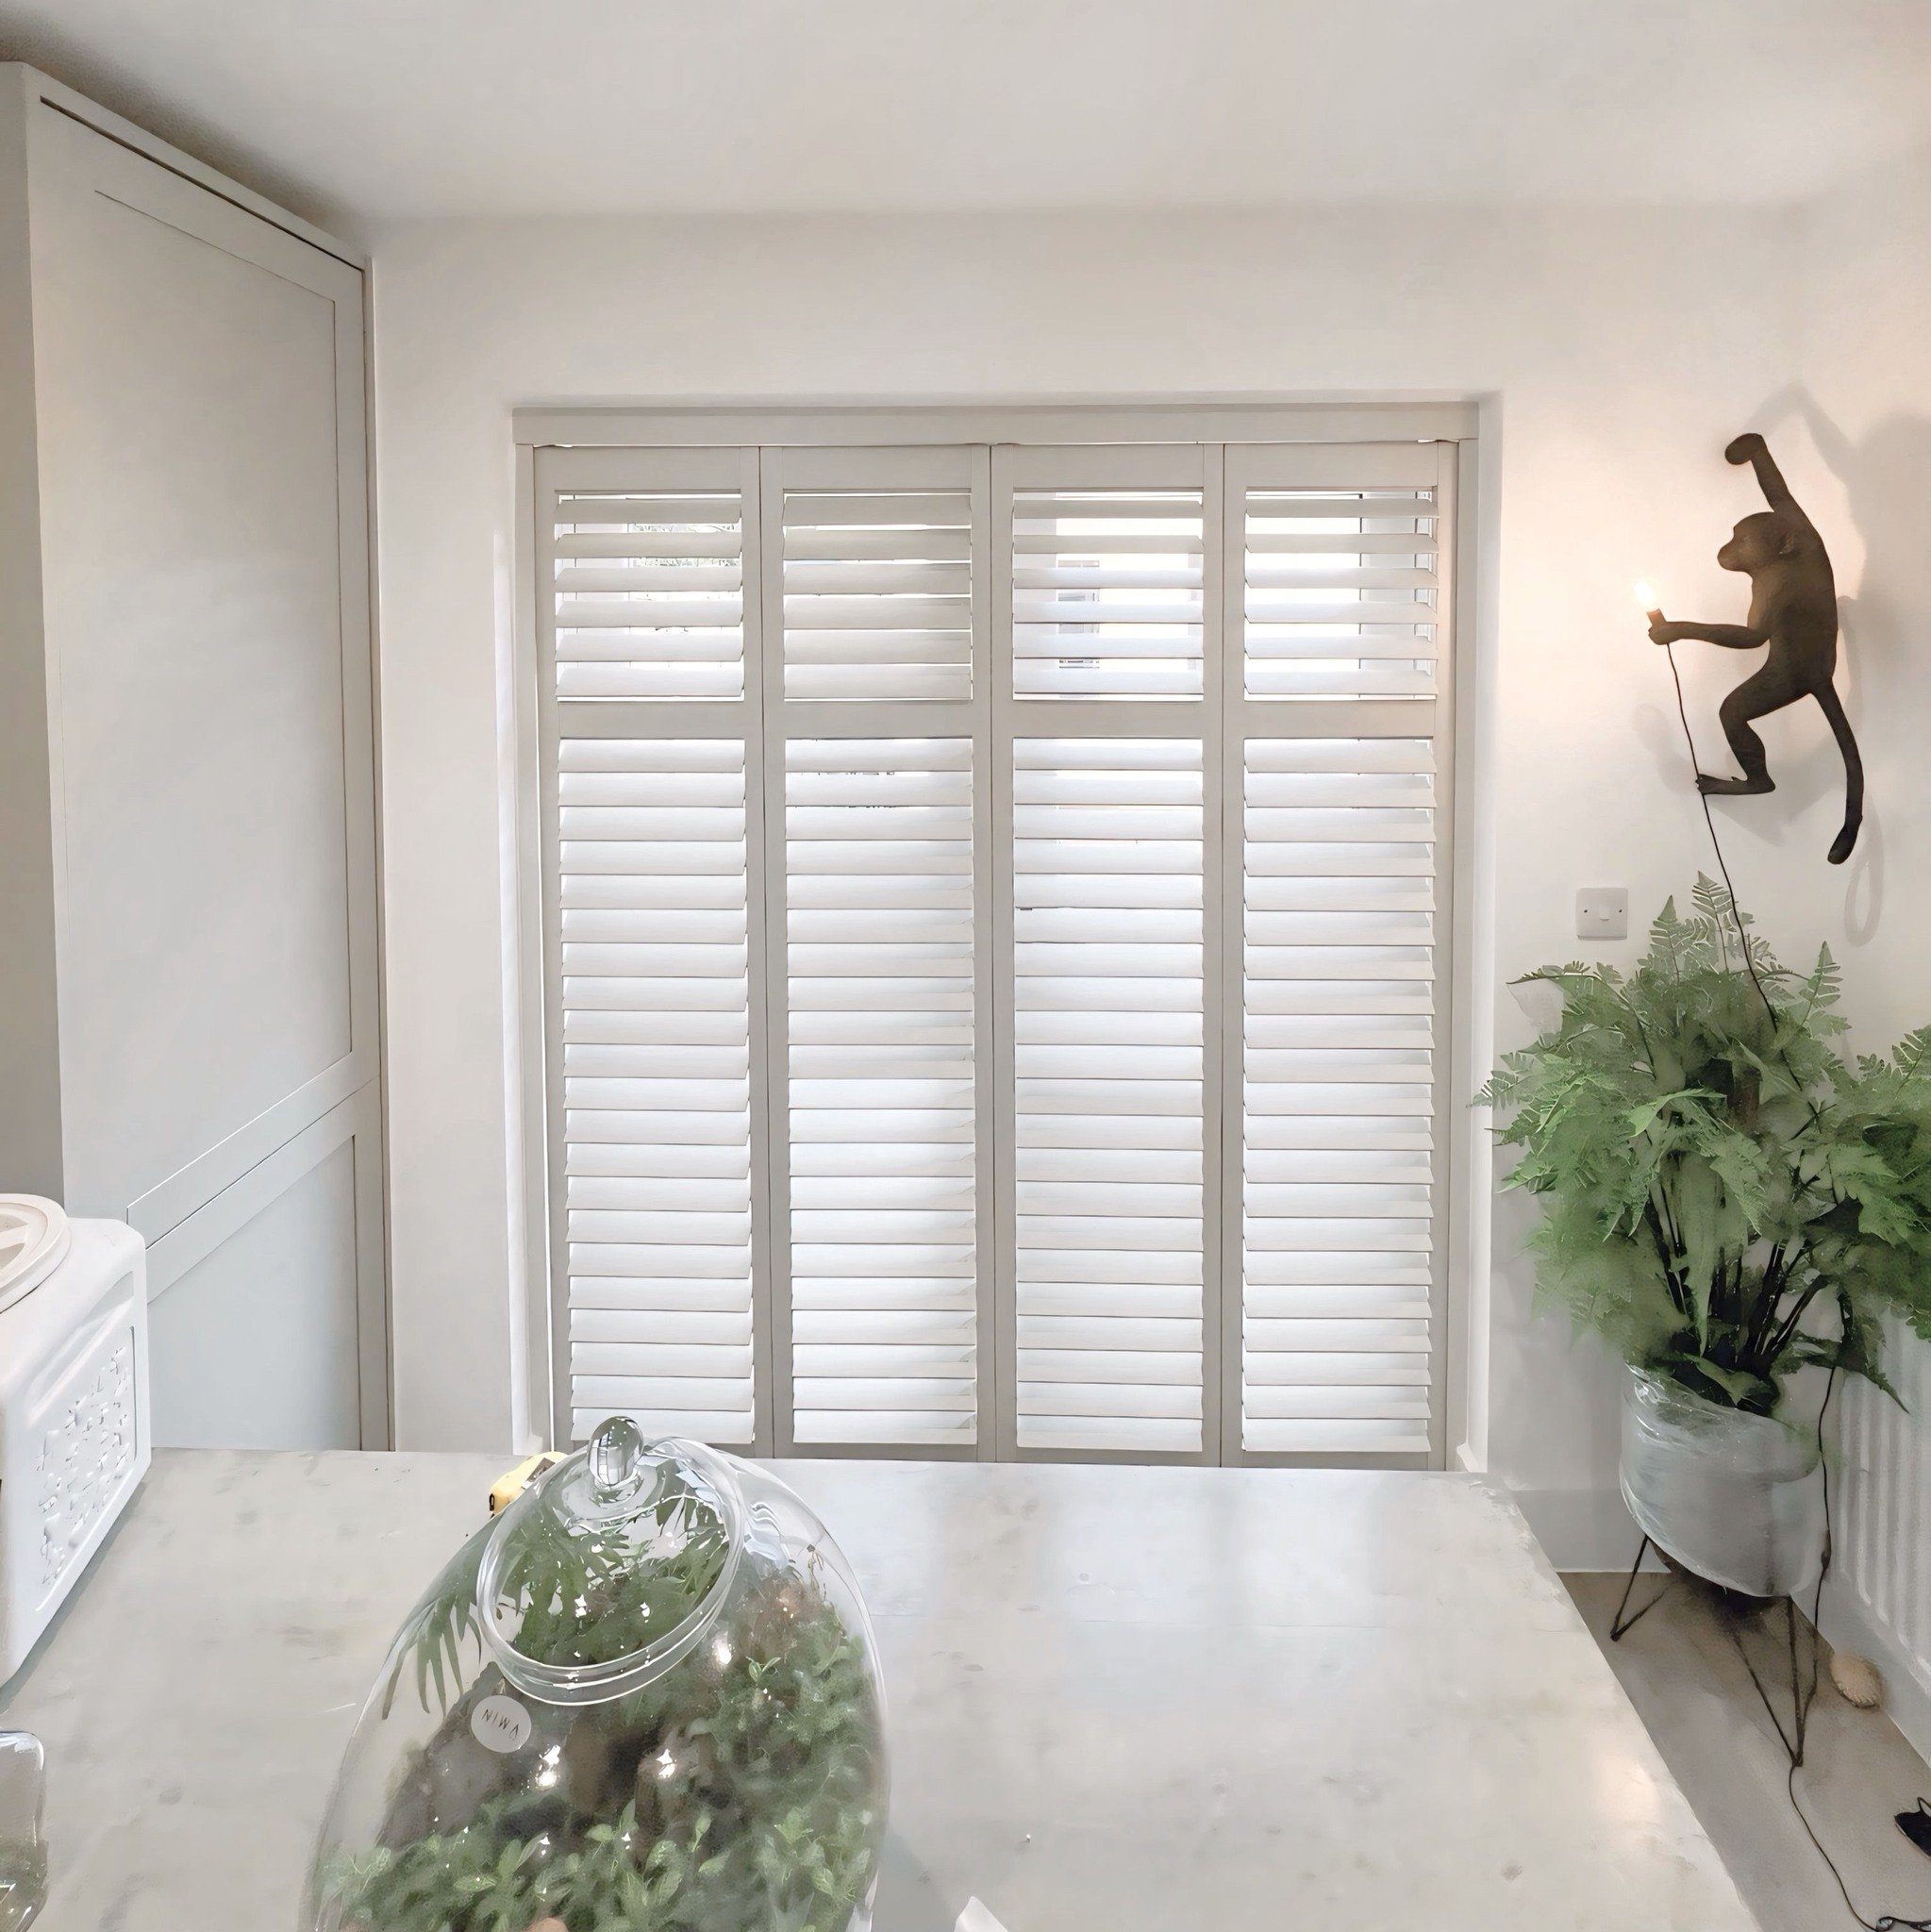 Transforming Windows with Elegance and Precision! Our Latest Installation Features Full Height Tracked System Shutters, with Midrail to Align To The Transom, 76mm Medium Slats and Hidden Mechanism for Seamless Operation. 

Finished in The Sophisticat